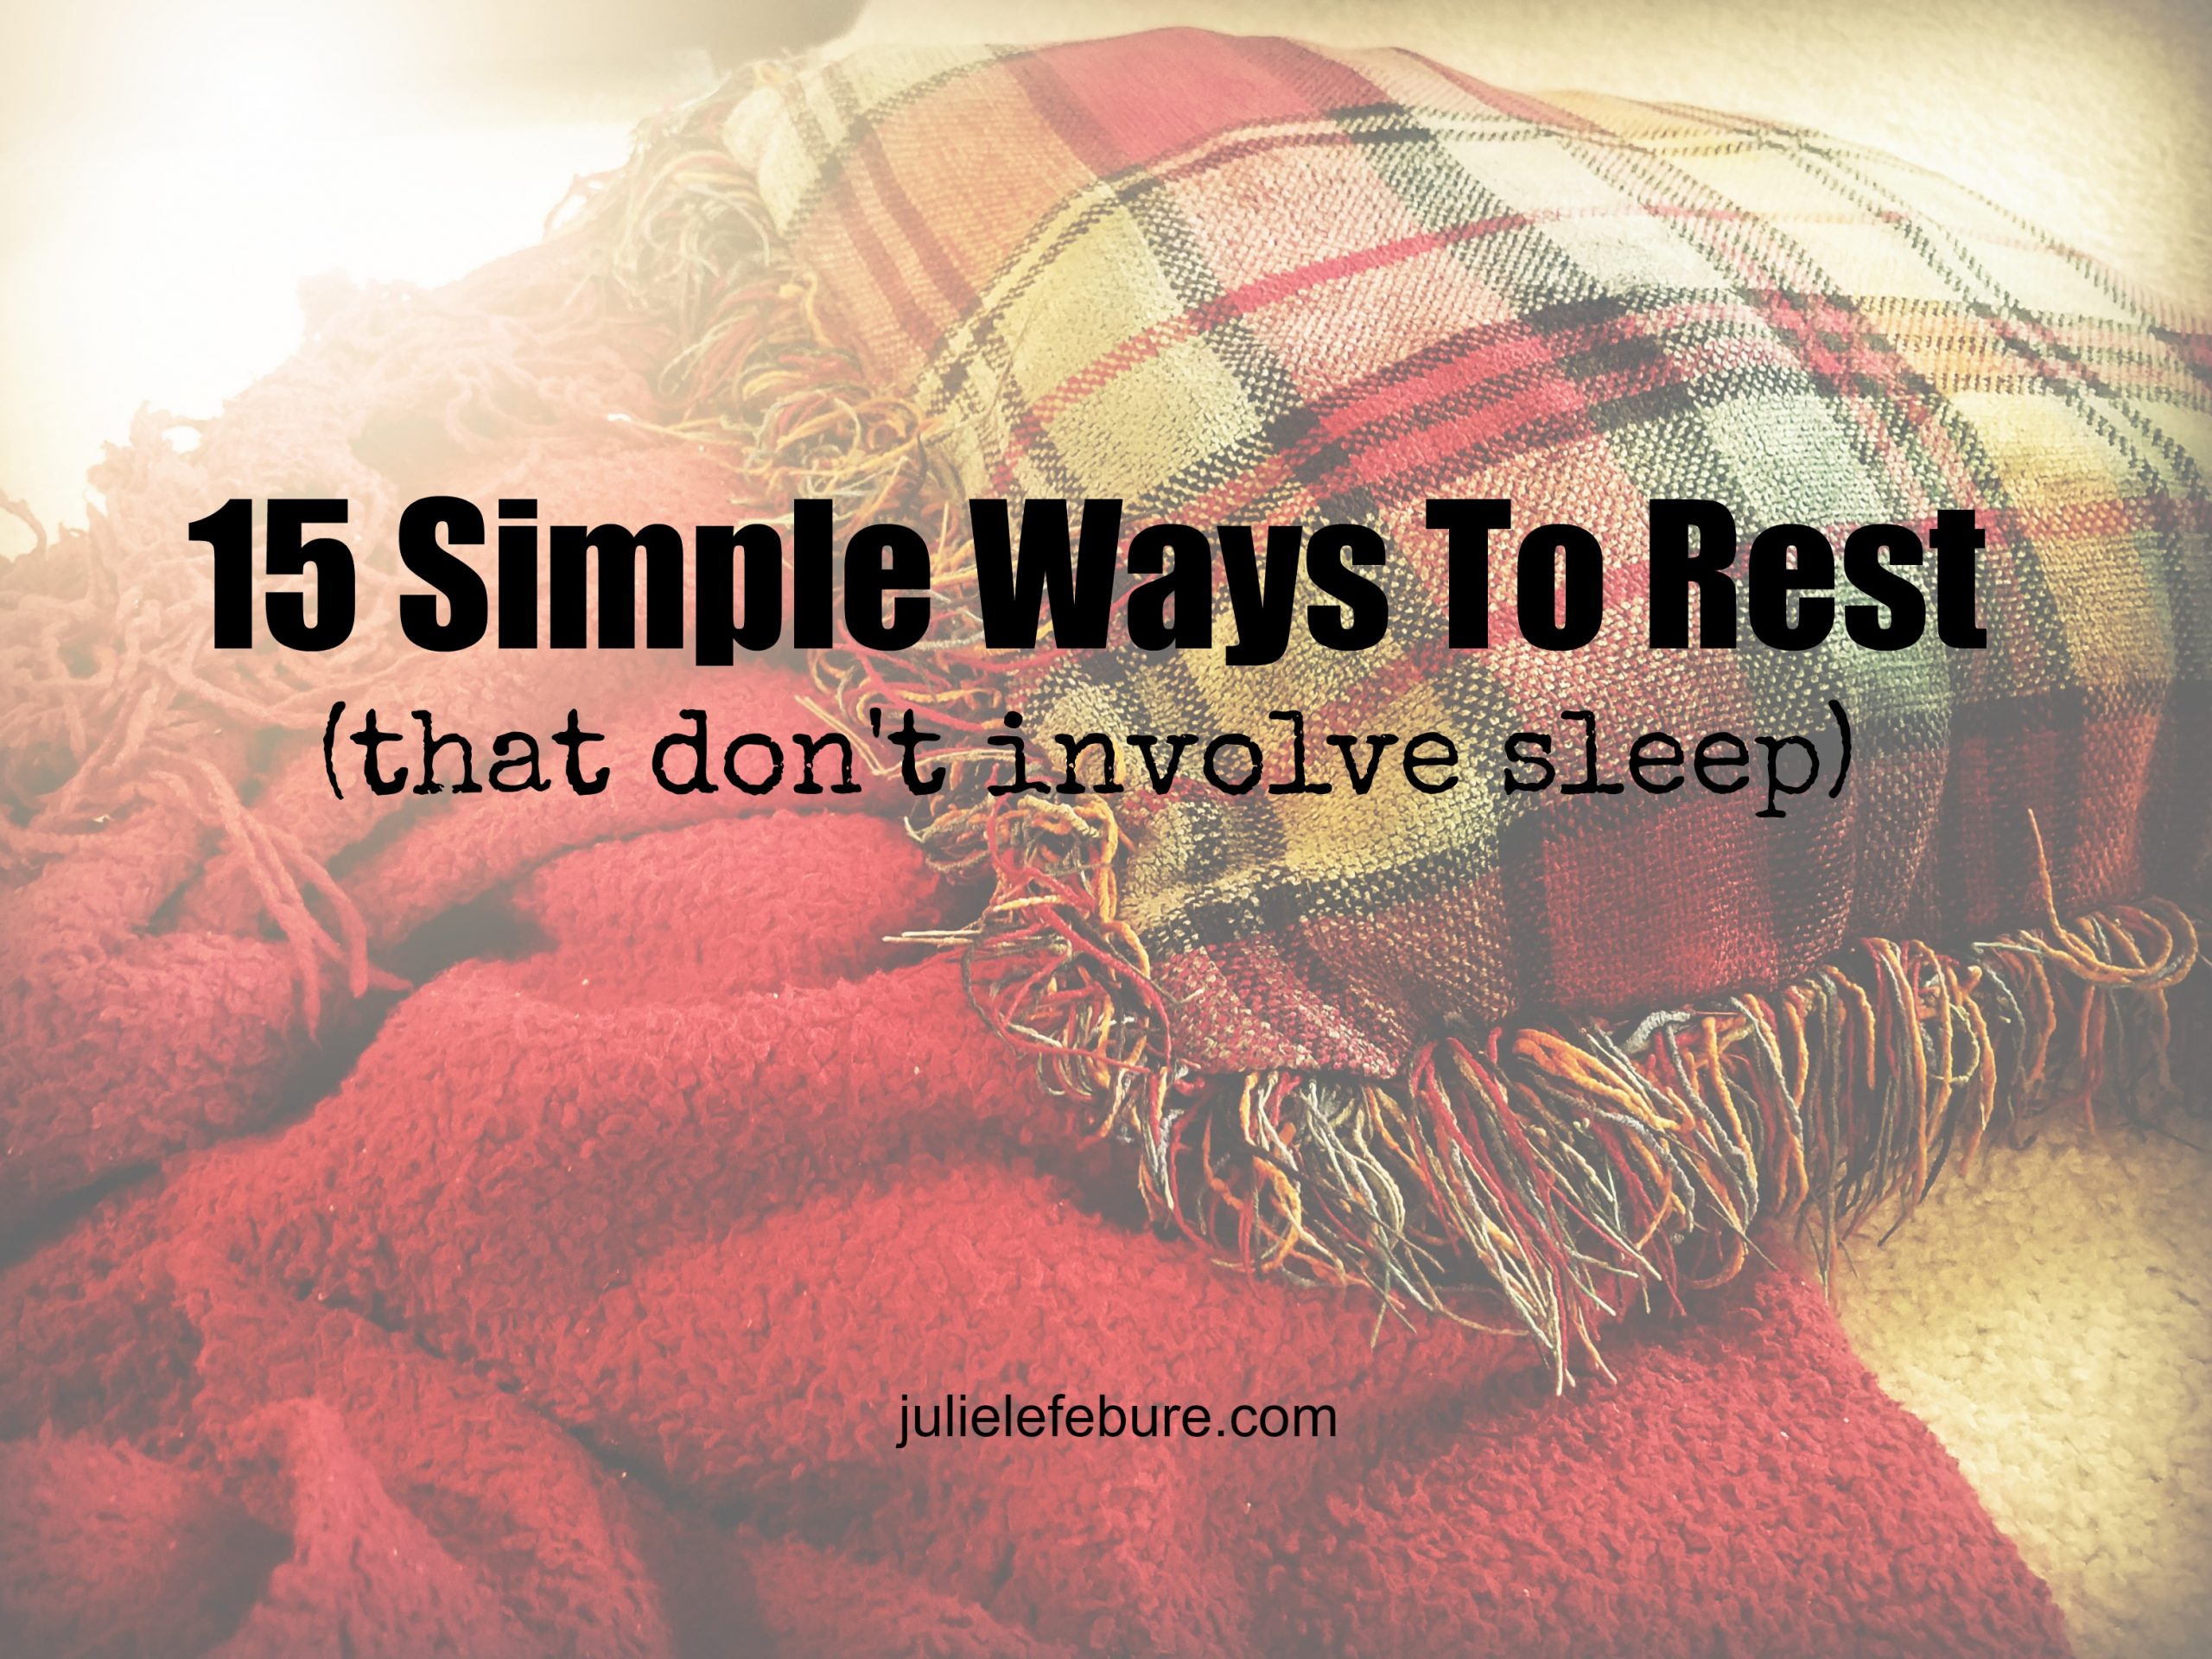 15 Simple Ways To Rest (That Don’t Involve Sleep)